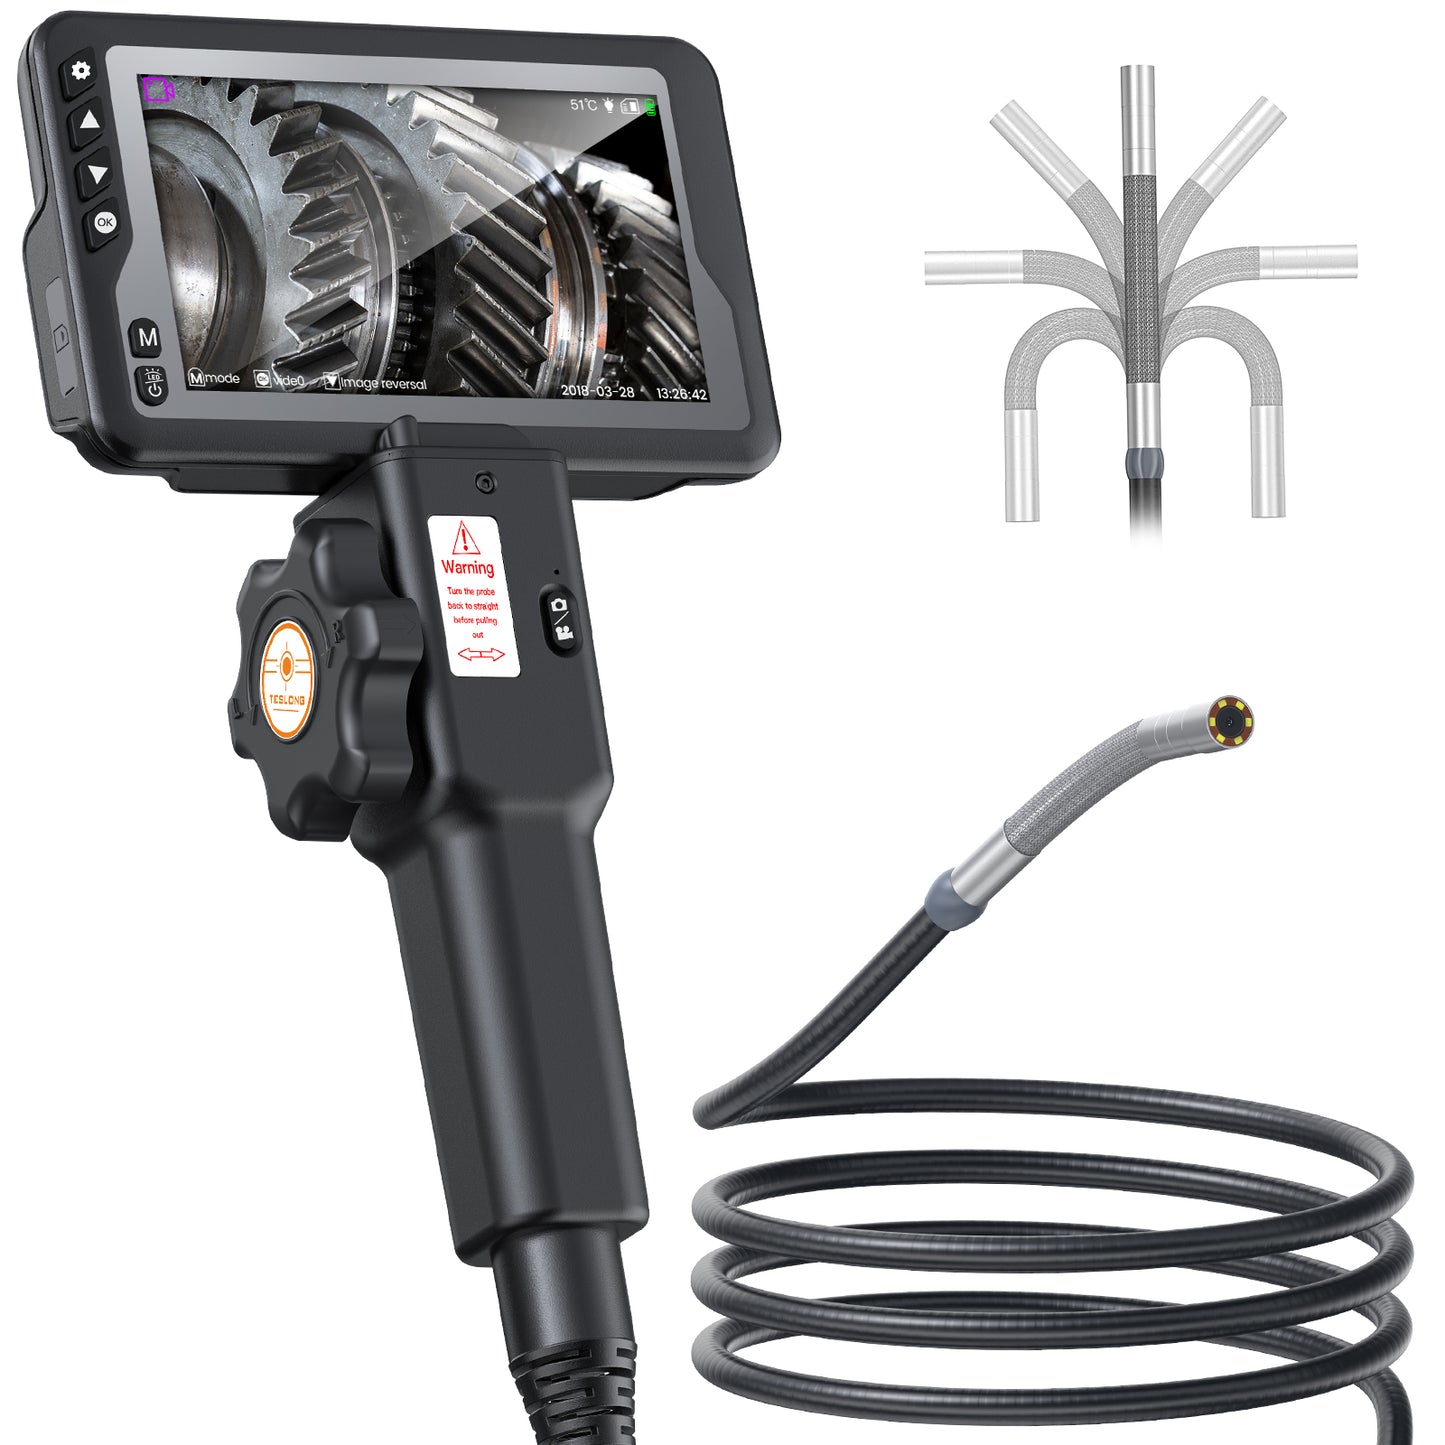 Borescope Inspection Camera - 4.5inch LCD Screen, Teslong Two-Way Articulating 1m 8.5mm probe